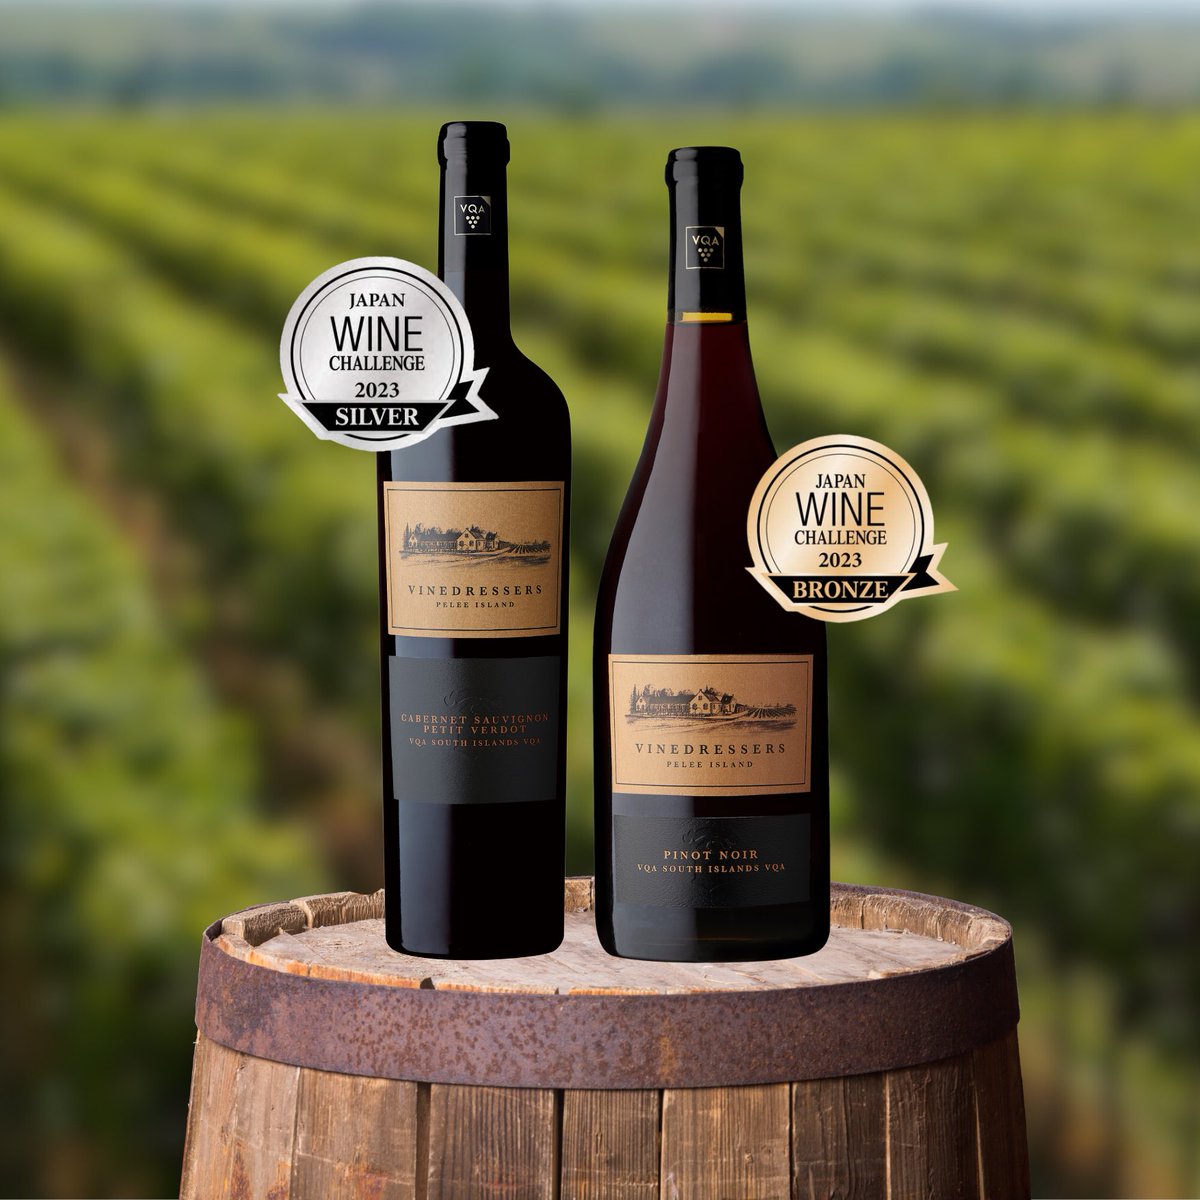 We’re proud to share that two of our Vinedresser wines took home awards at the @japanwinechallenge this year!🎉 Our Vinedressers Cabernet Sauvignon Petit Verdot took home a silver award 🥈 Our Vinedressers Pinot Noir took home a bronze award 🥉